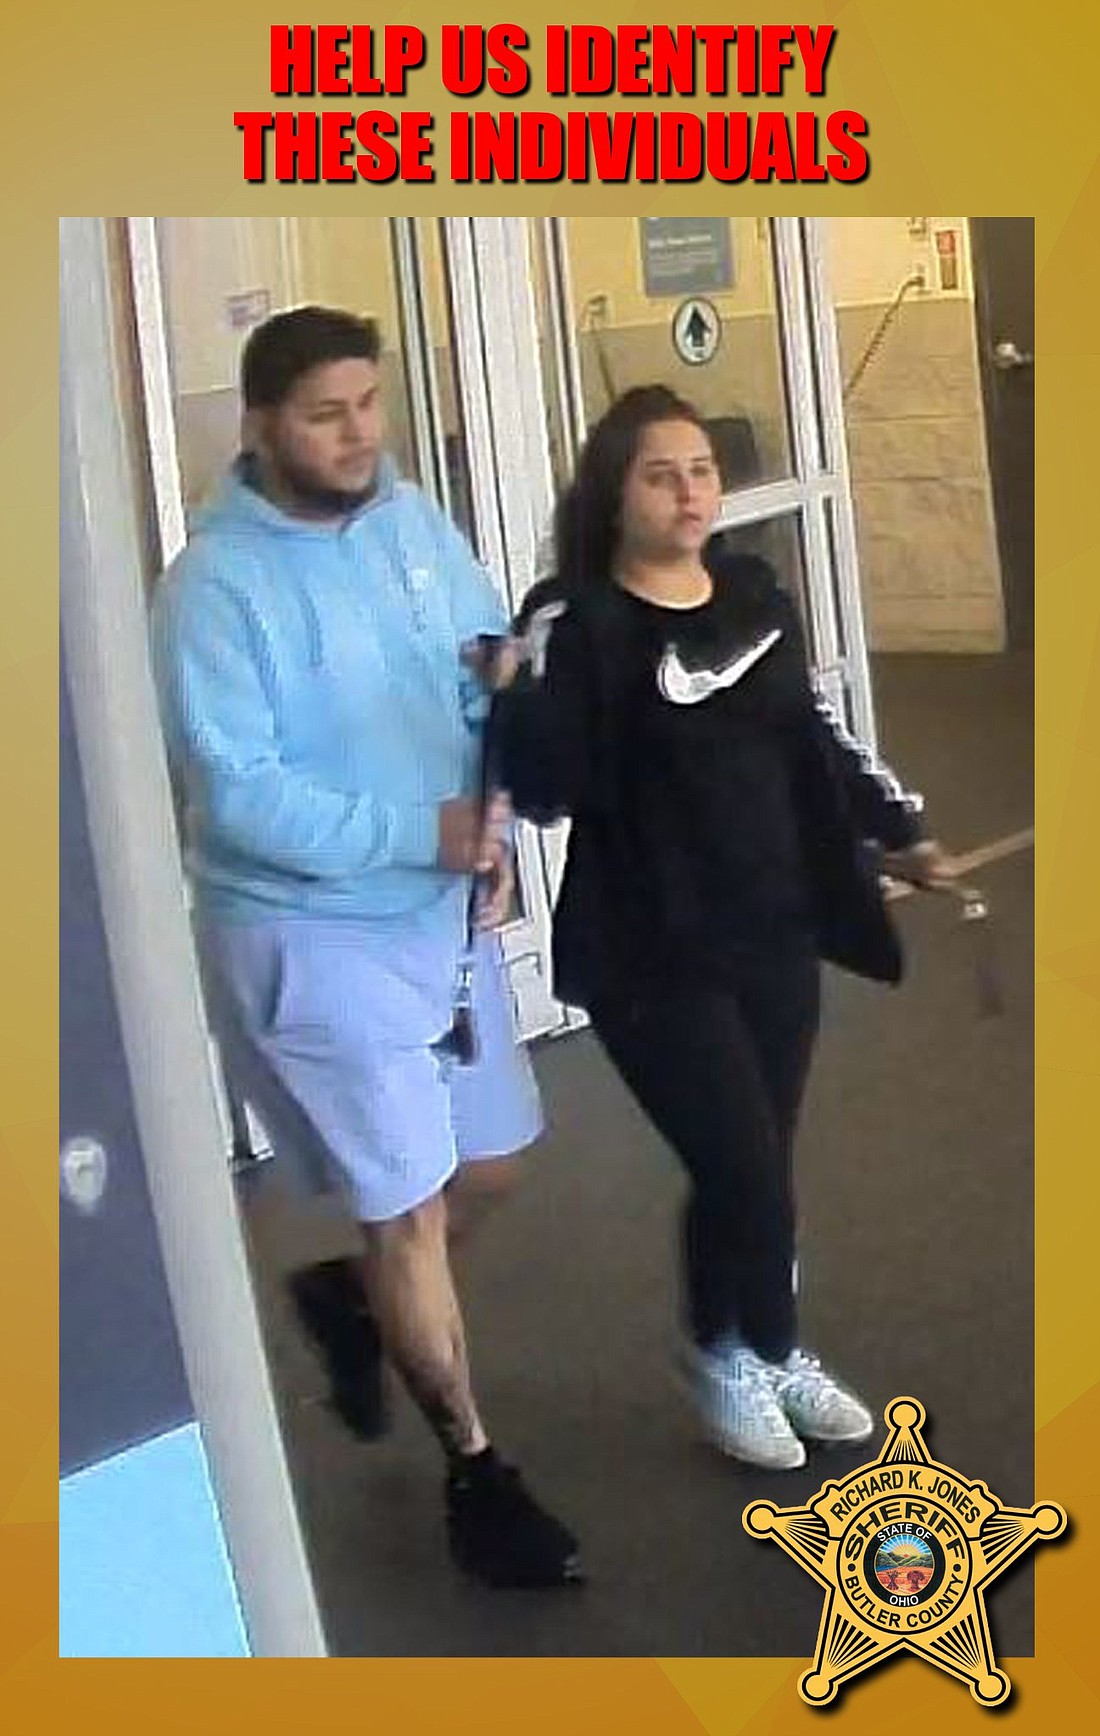 Sheriff Department asking for help identifying these people.